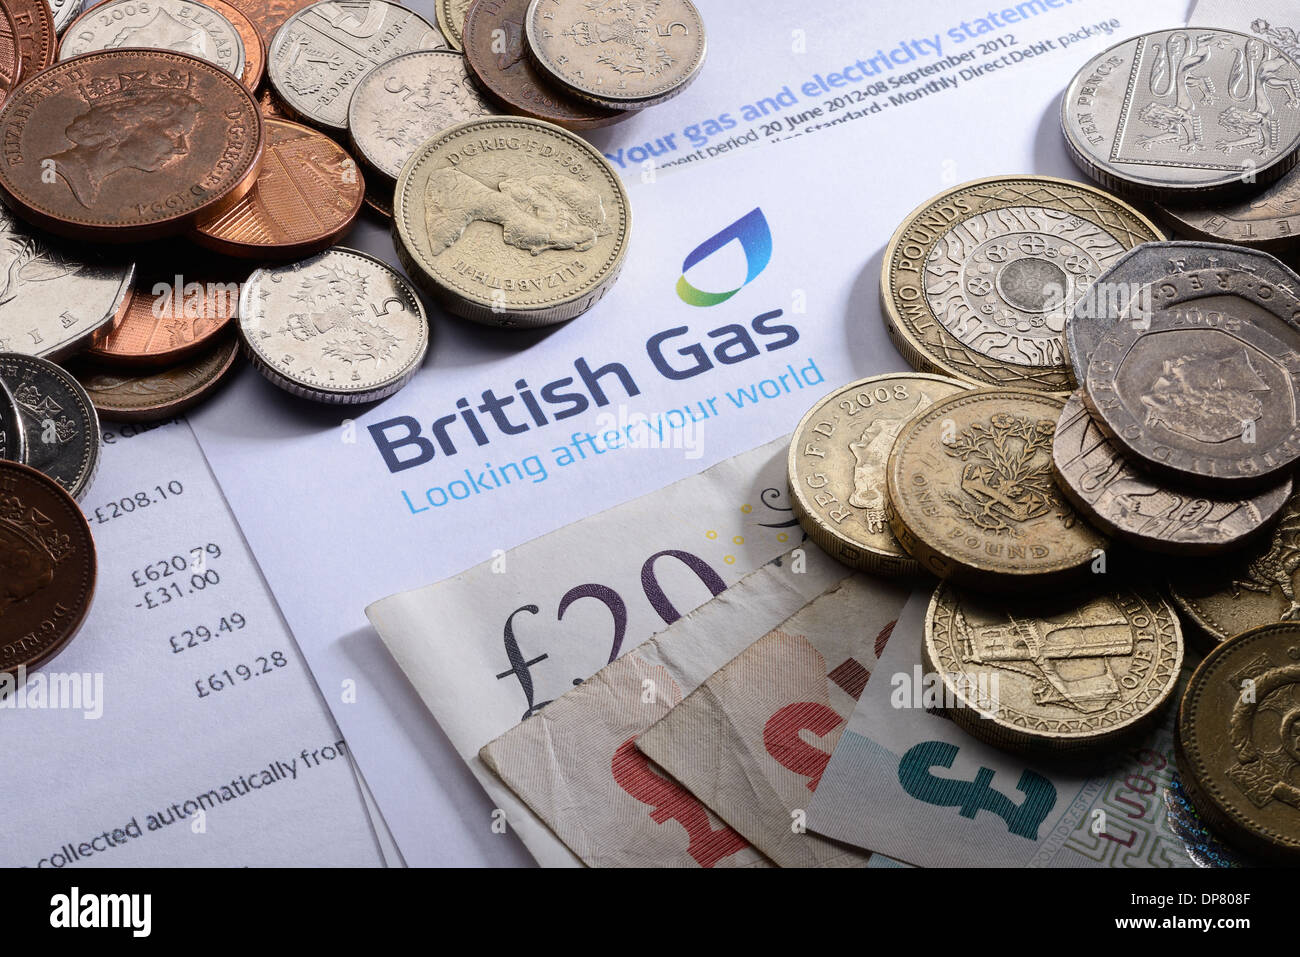 British Gas energy bill with coins and money Stock Photo